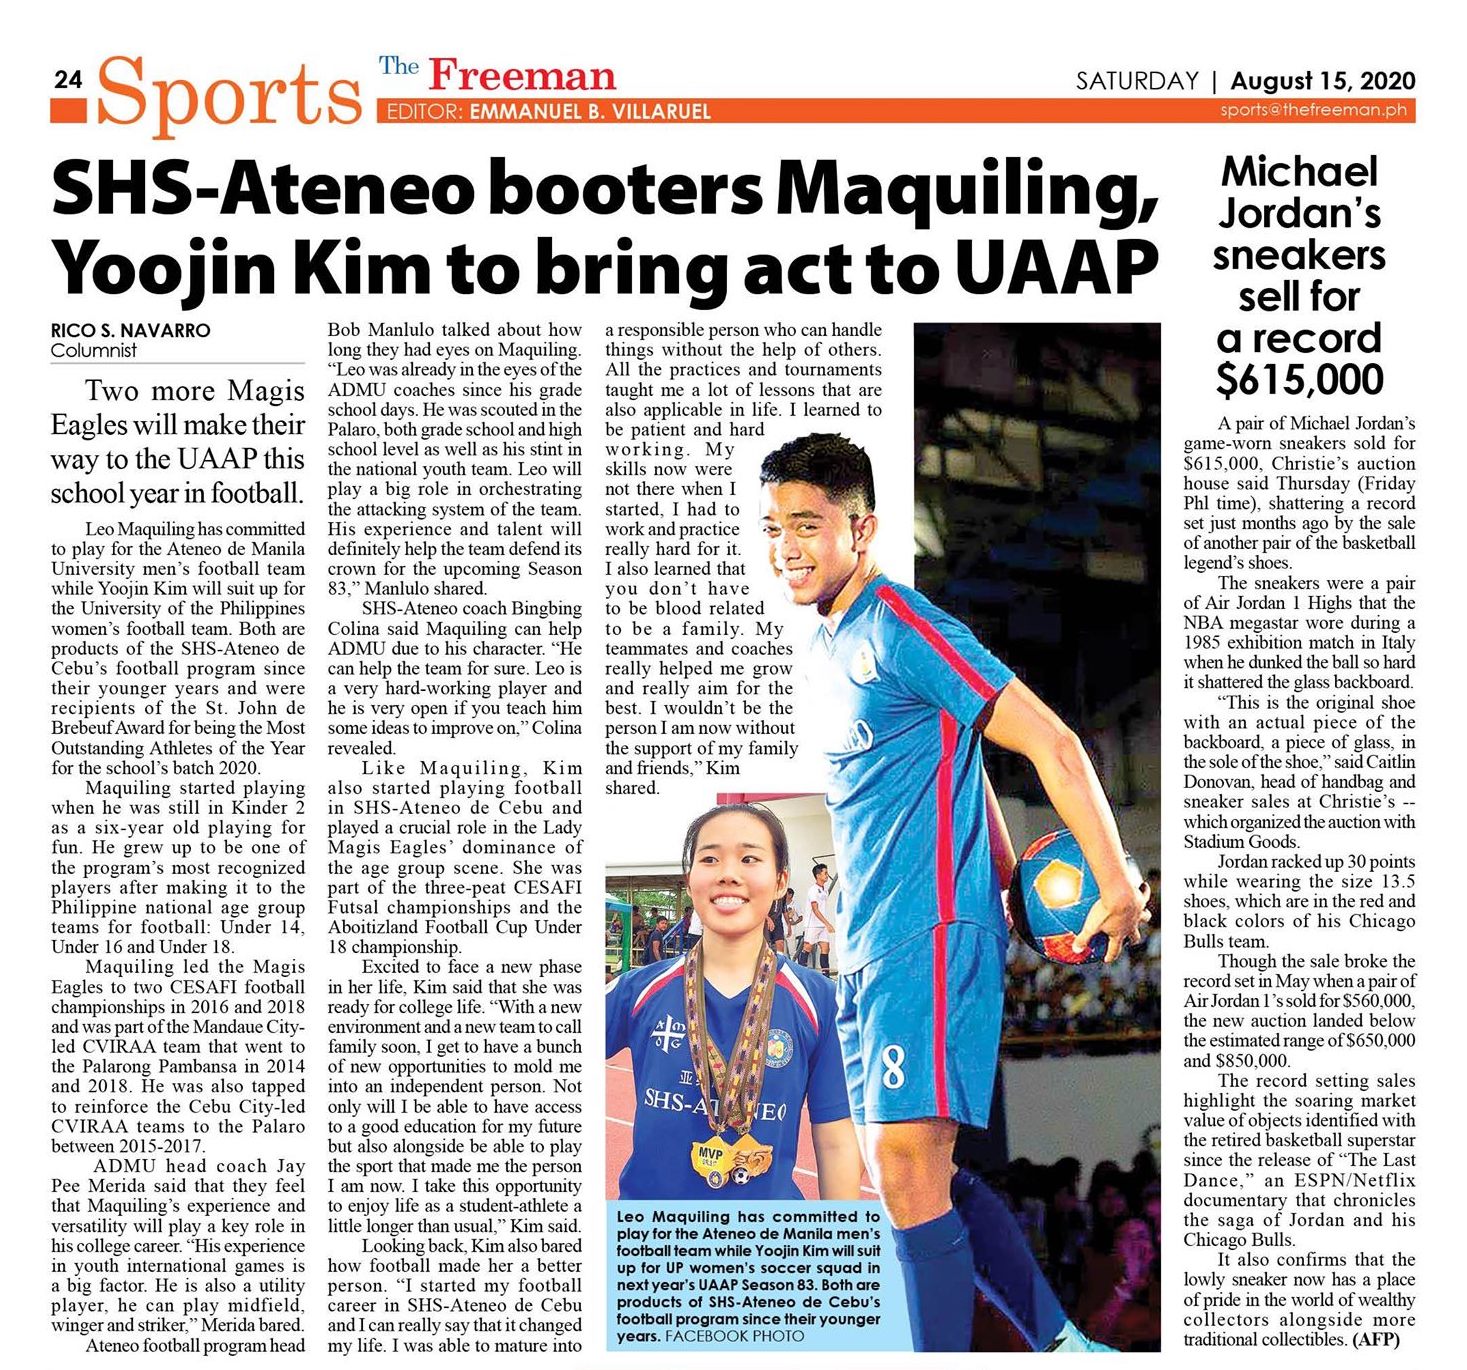 SHS-Ateneo’s Maquiling, Kim Head off to the UAAP